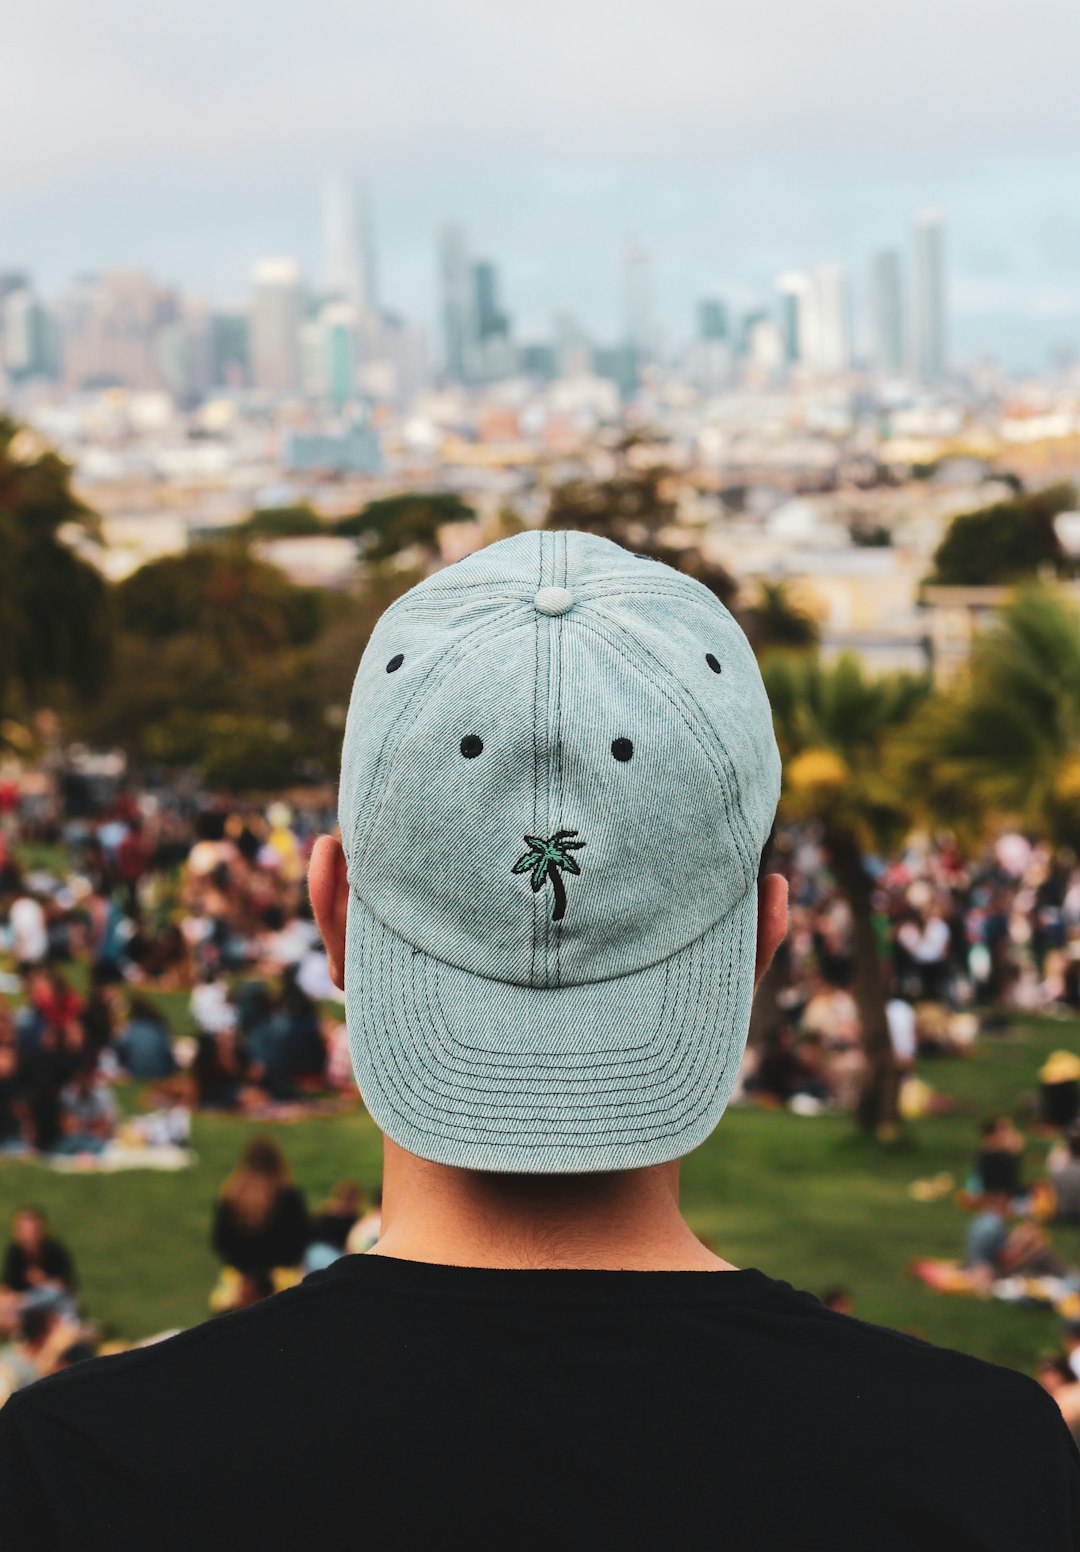 Mission Dolores Park has everything — the views, the open space, the lively people, and most importantly, the palm trees. I had one of my favorite hats with me that ended up being perfect for the occasion. I let my friend borrow it to create this shot — def one of my favorites.